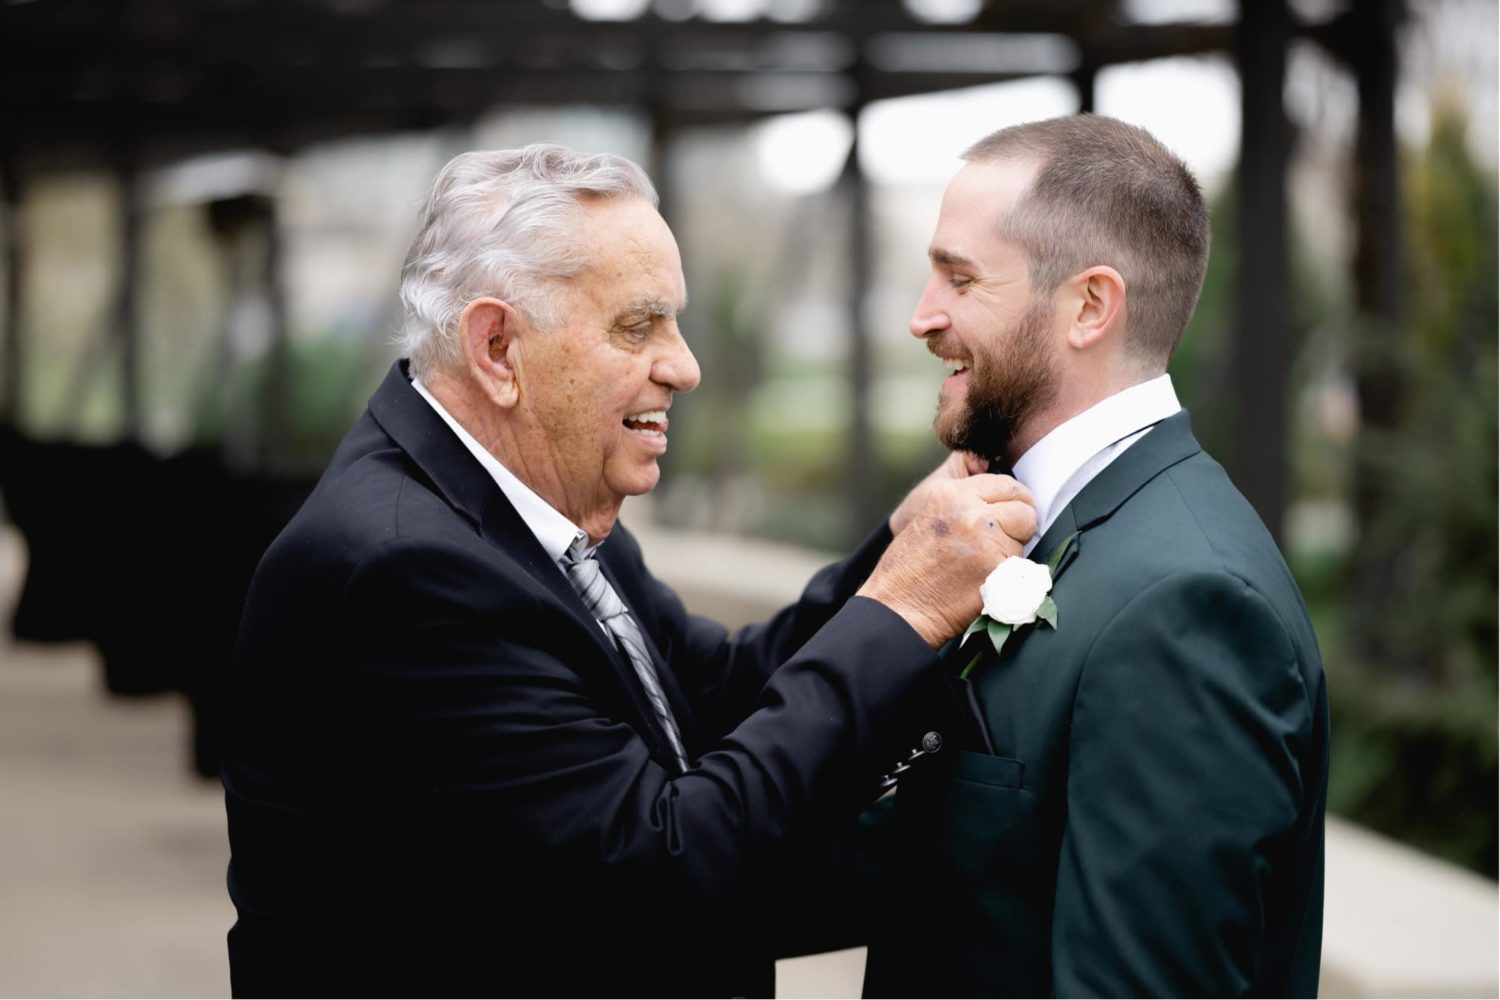 Father of the groom helping room straightened his tie